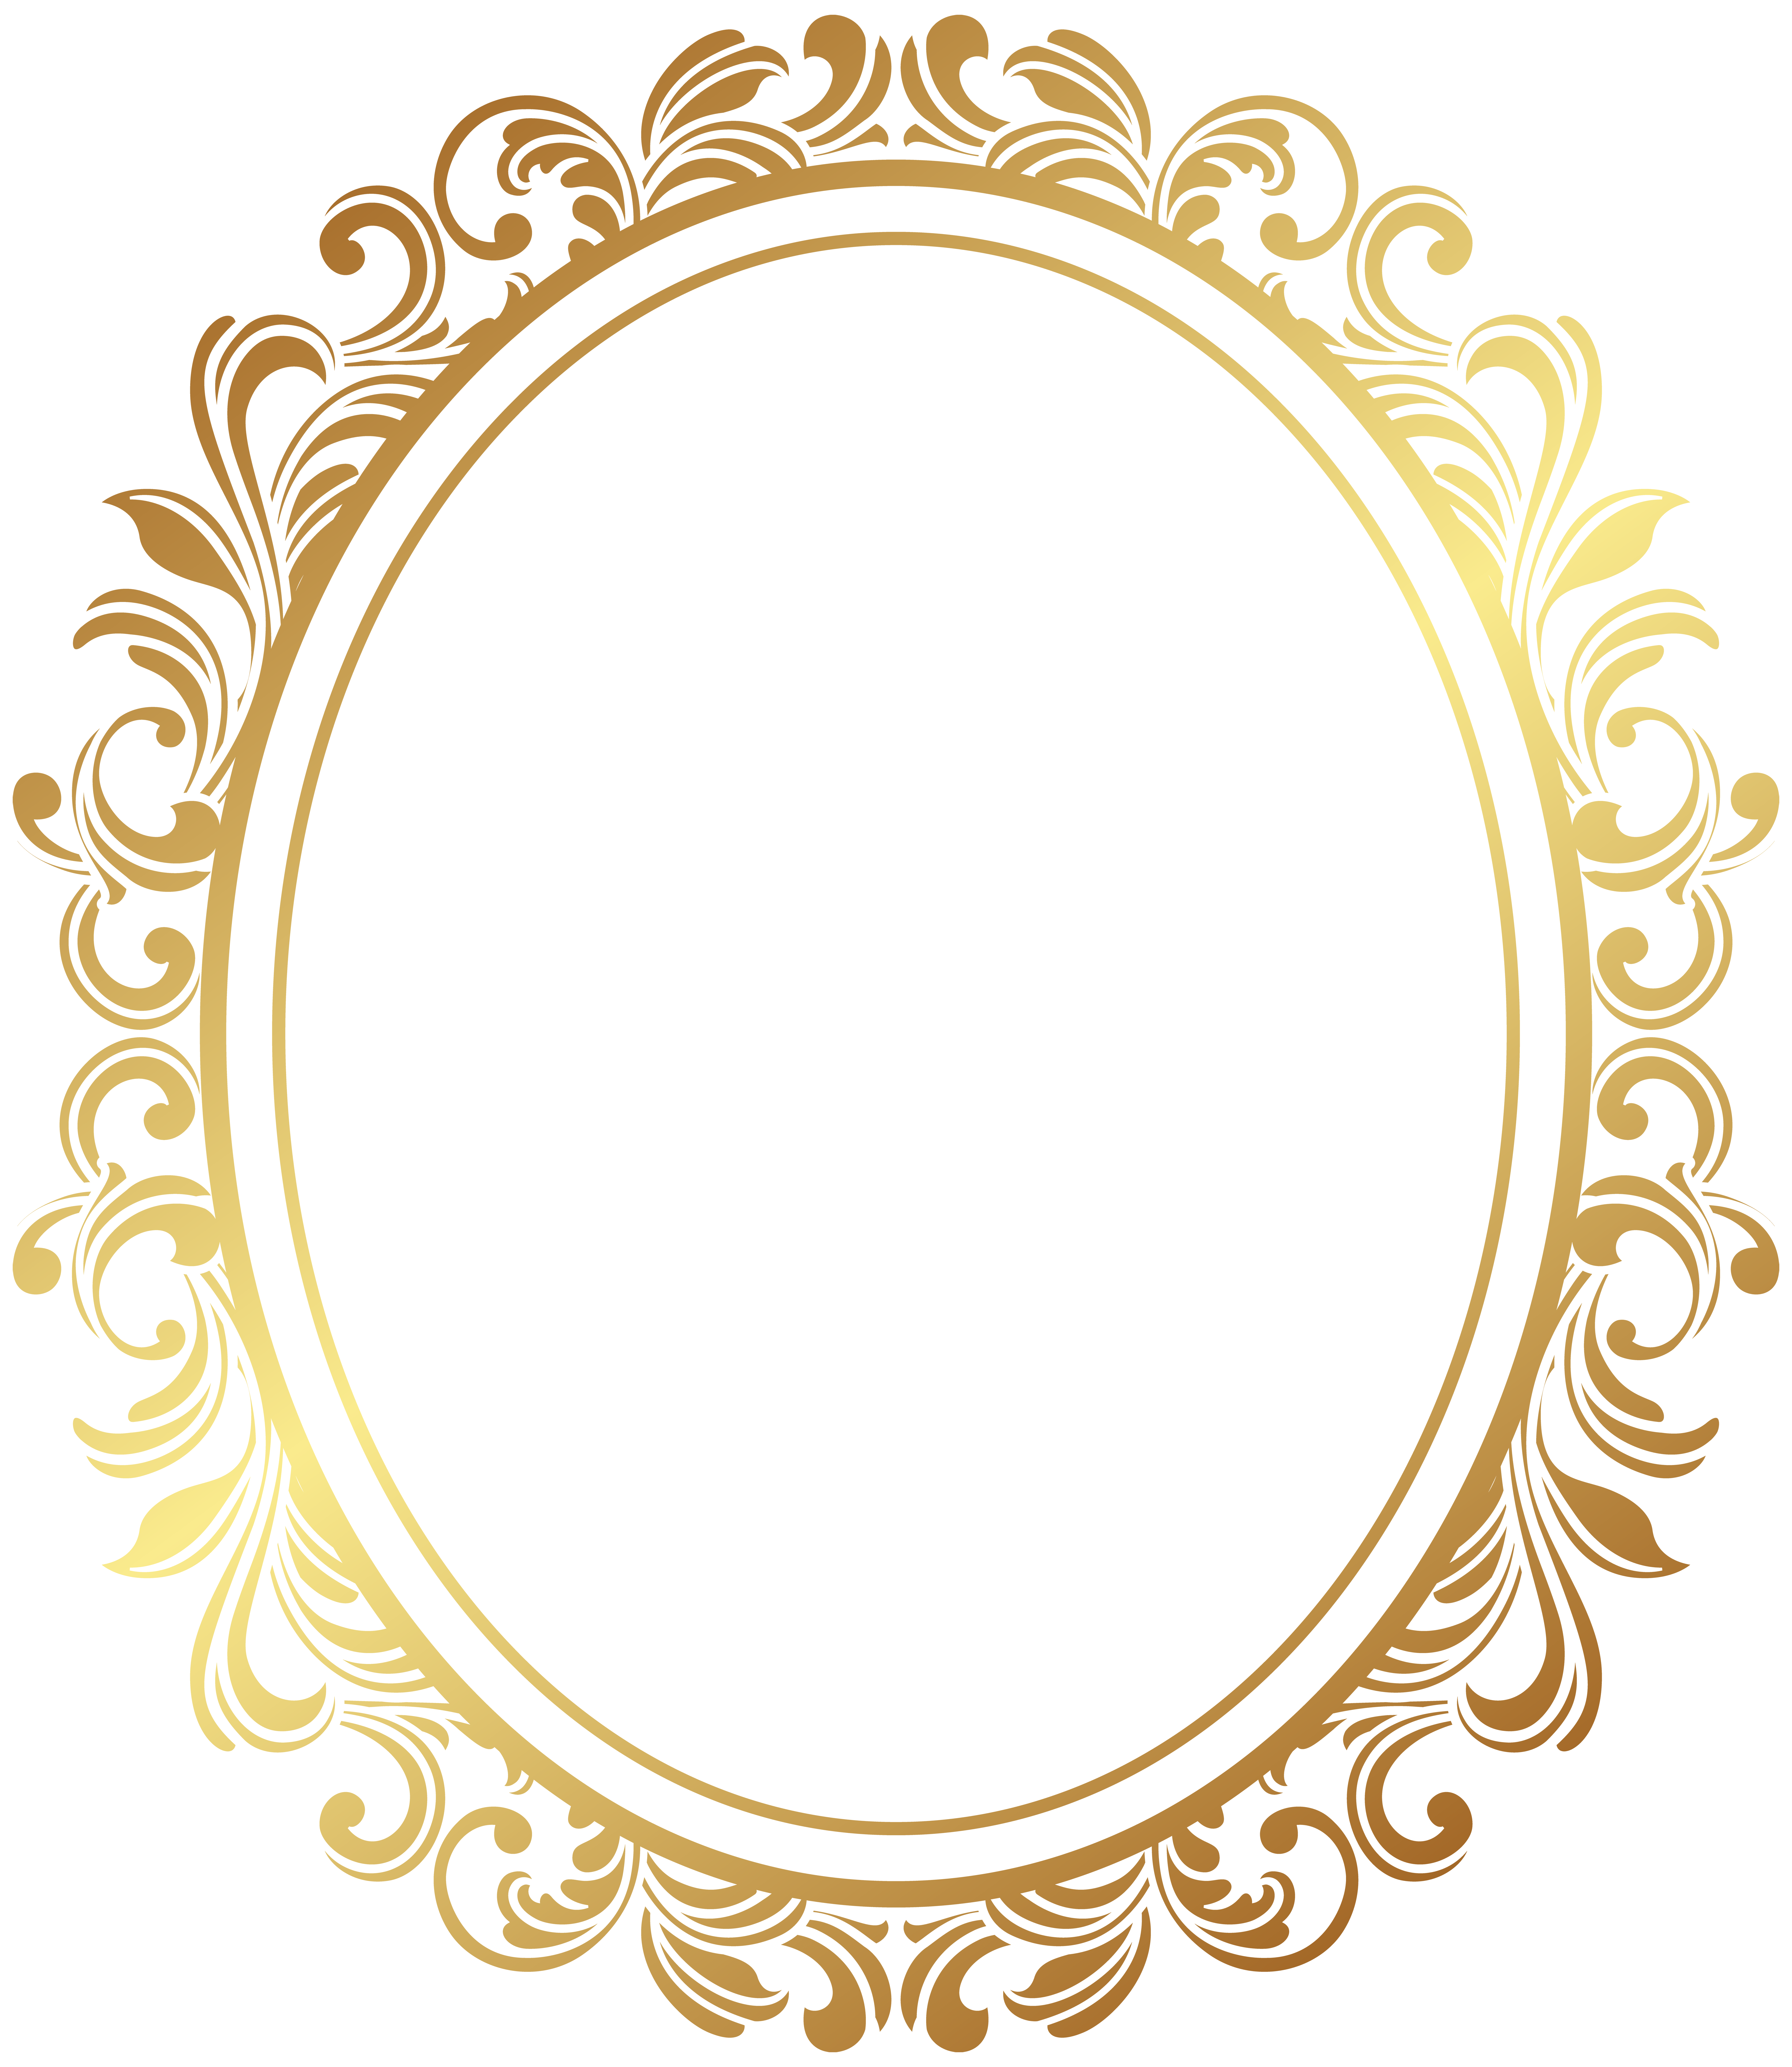 Round Frame PNG